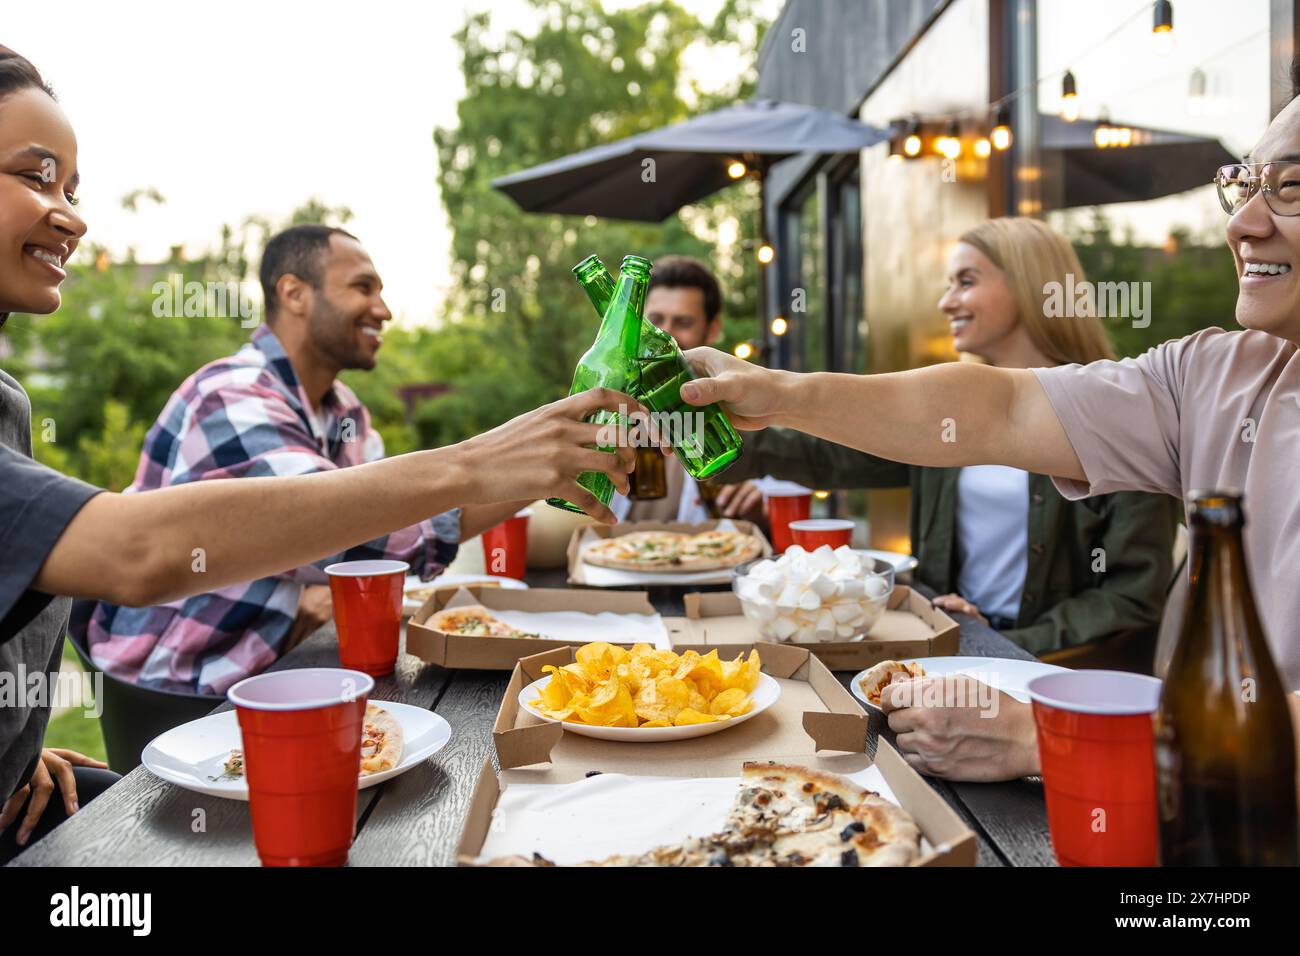 Young people enjoying leisure time together outside toasting with beer Stock Photo